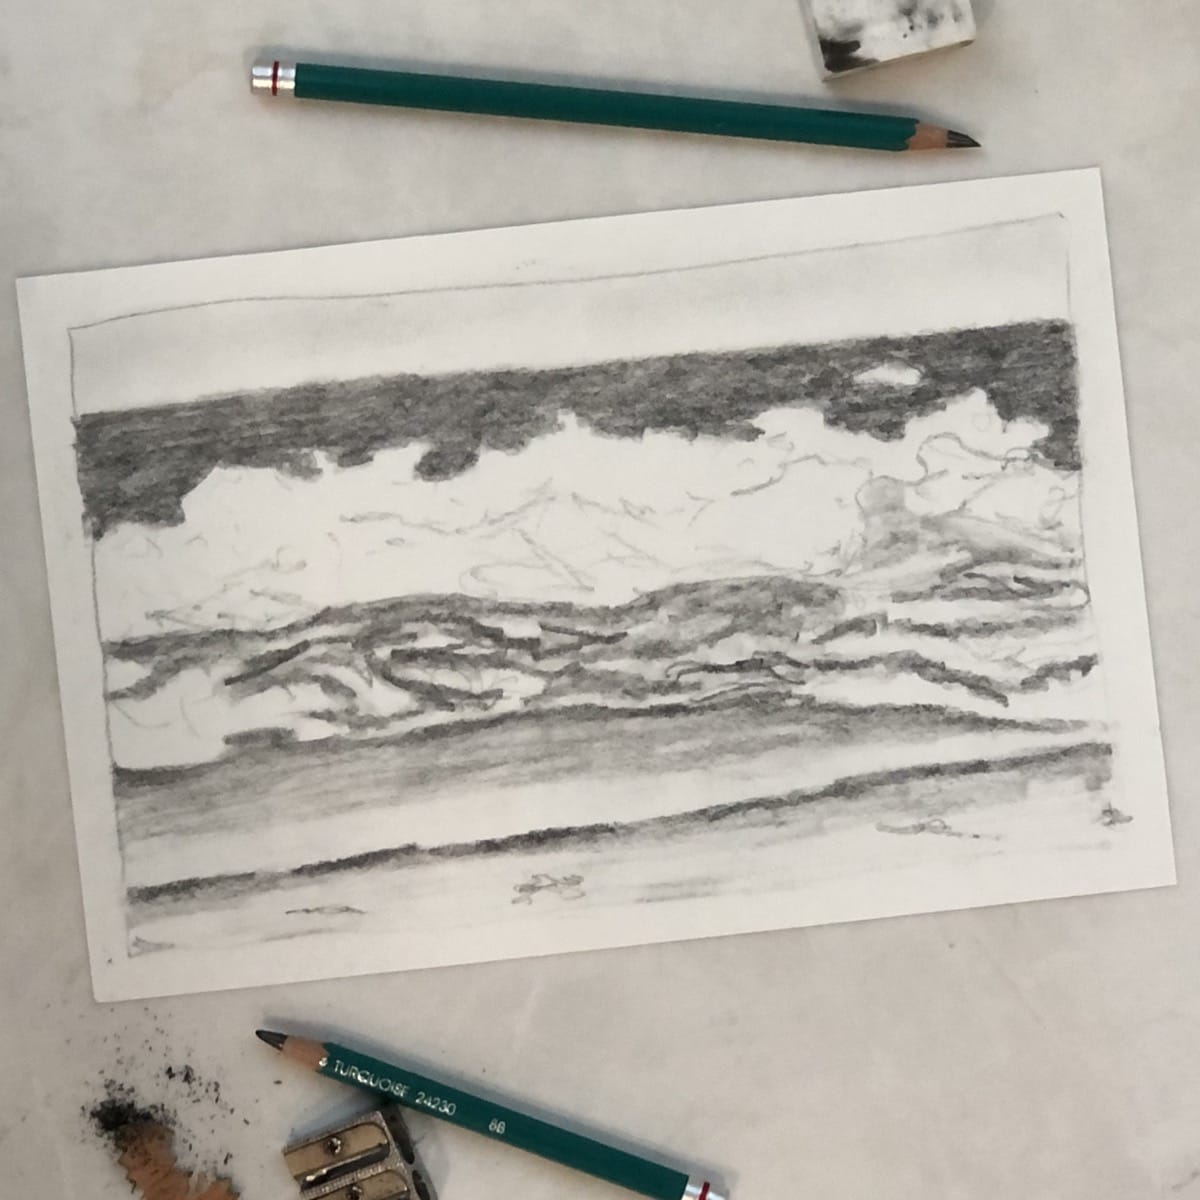 A pencil drawing of a seascape with drawing pencils, a pencil sharpener, and an eraser.